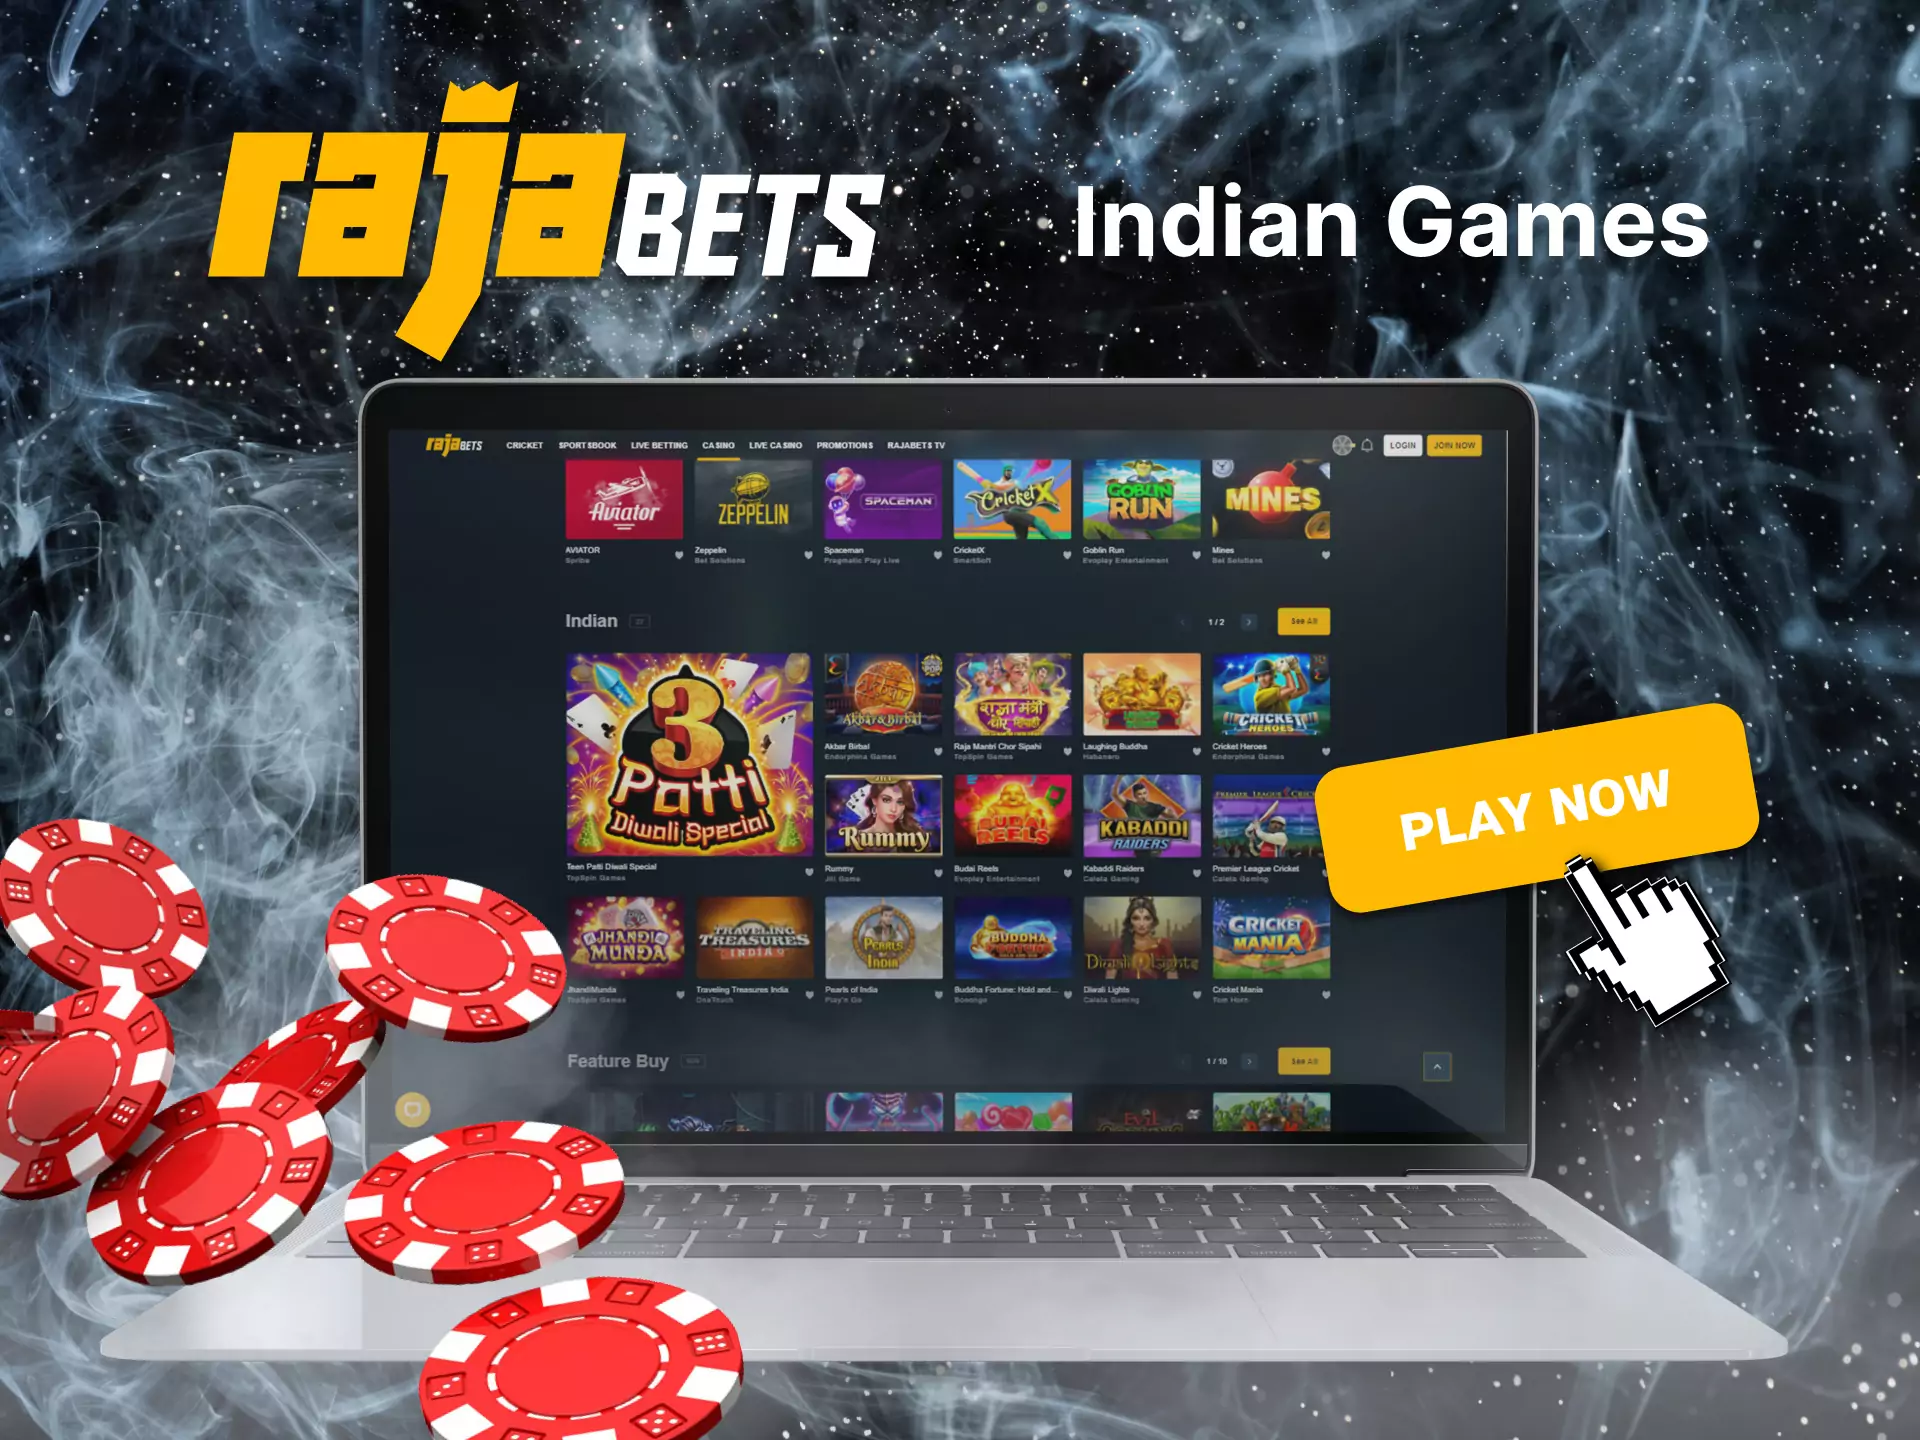 Try different Indian games in Rajabets.